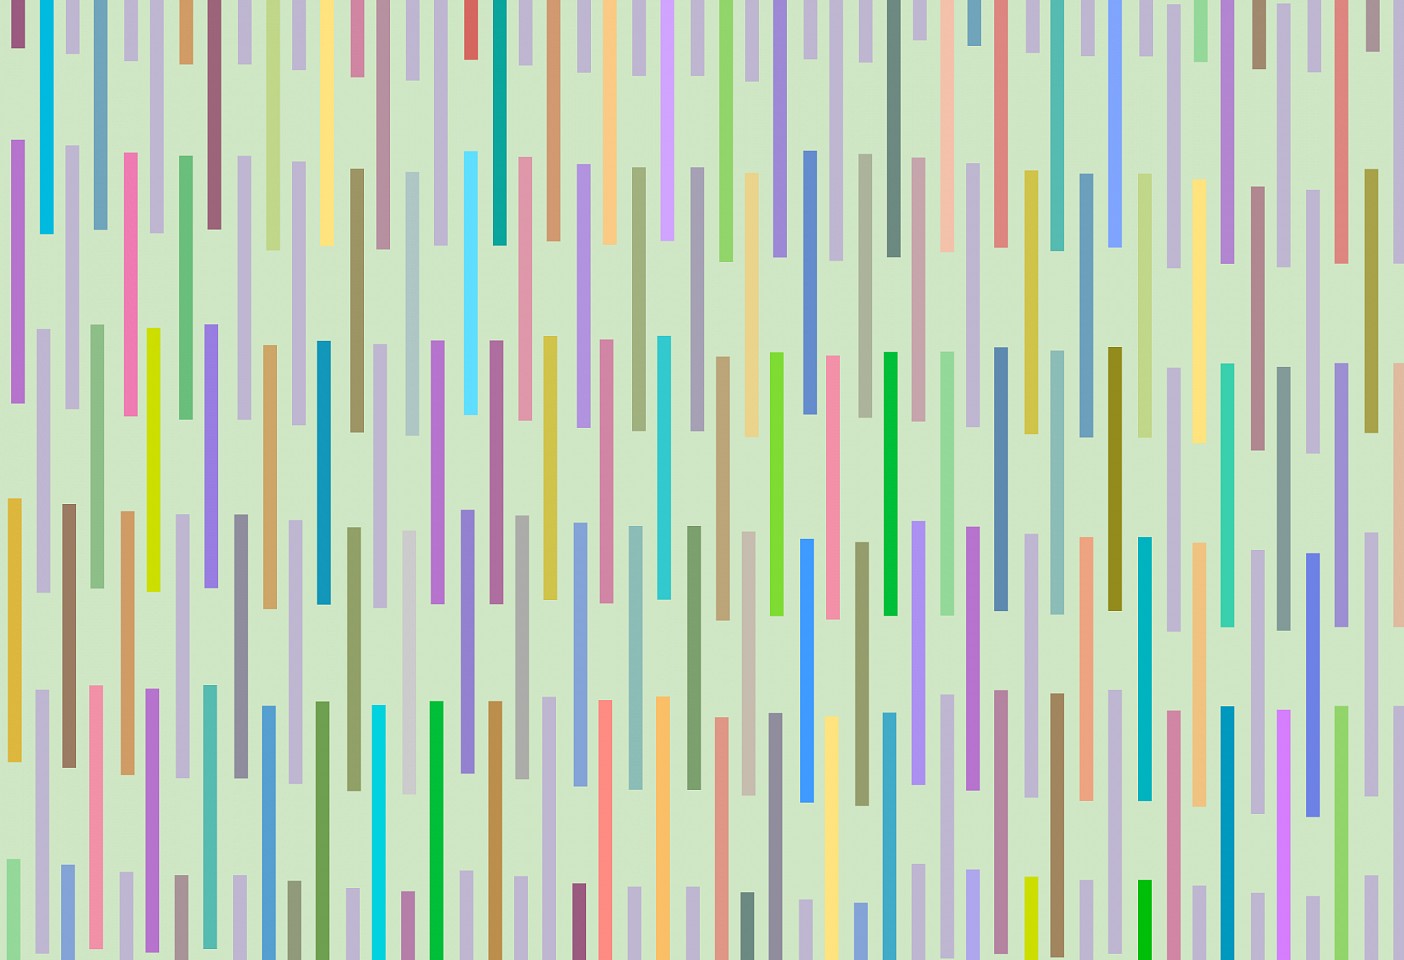 Dane Albert, Color Sticks #41 Dusk, 2023
Acrylic on canvas (Concept), 48 x 72 in. (121.9 x 182.9 cm)
Series of colored lines and shapes in multiple configurations
DA.2023.sticks-041-dusk